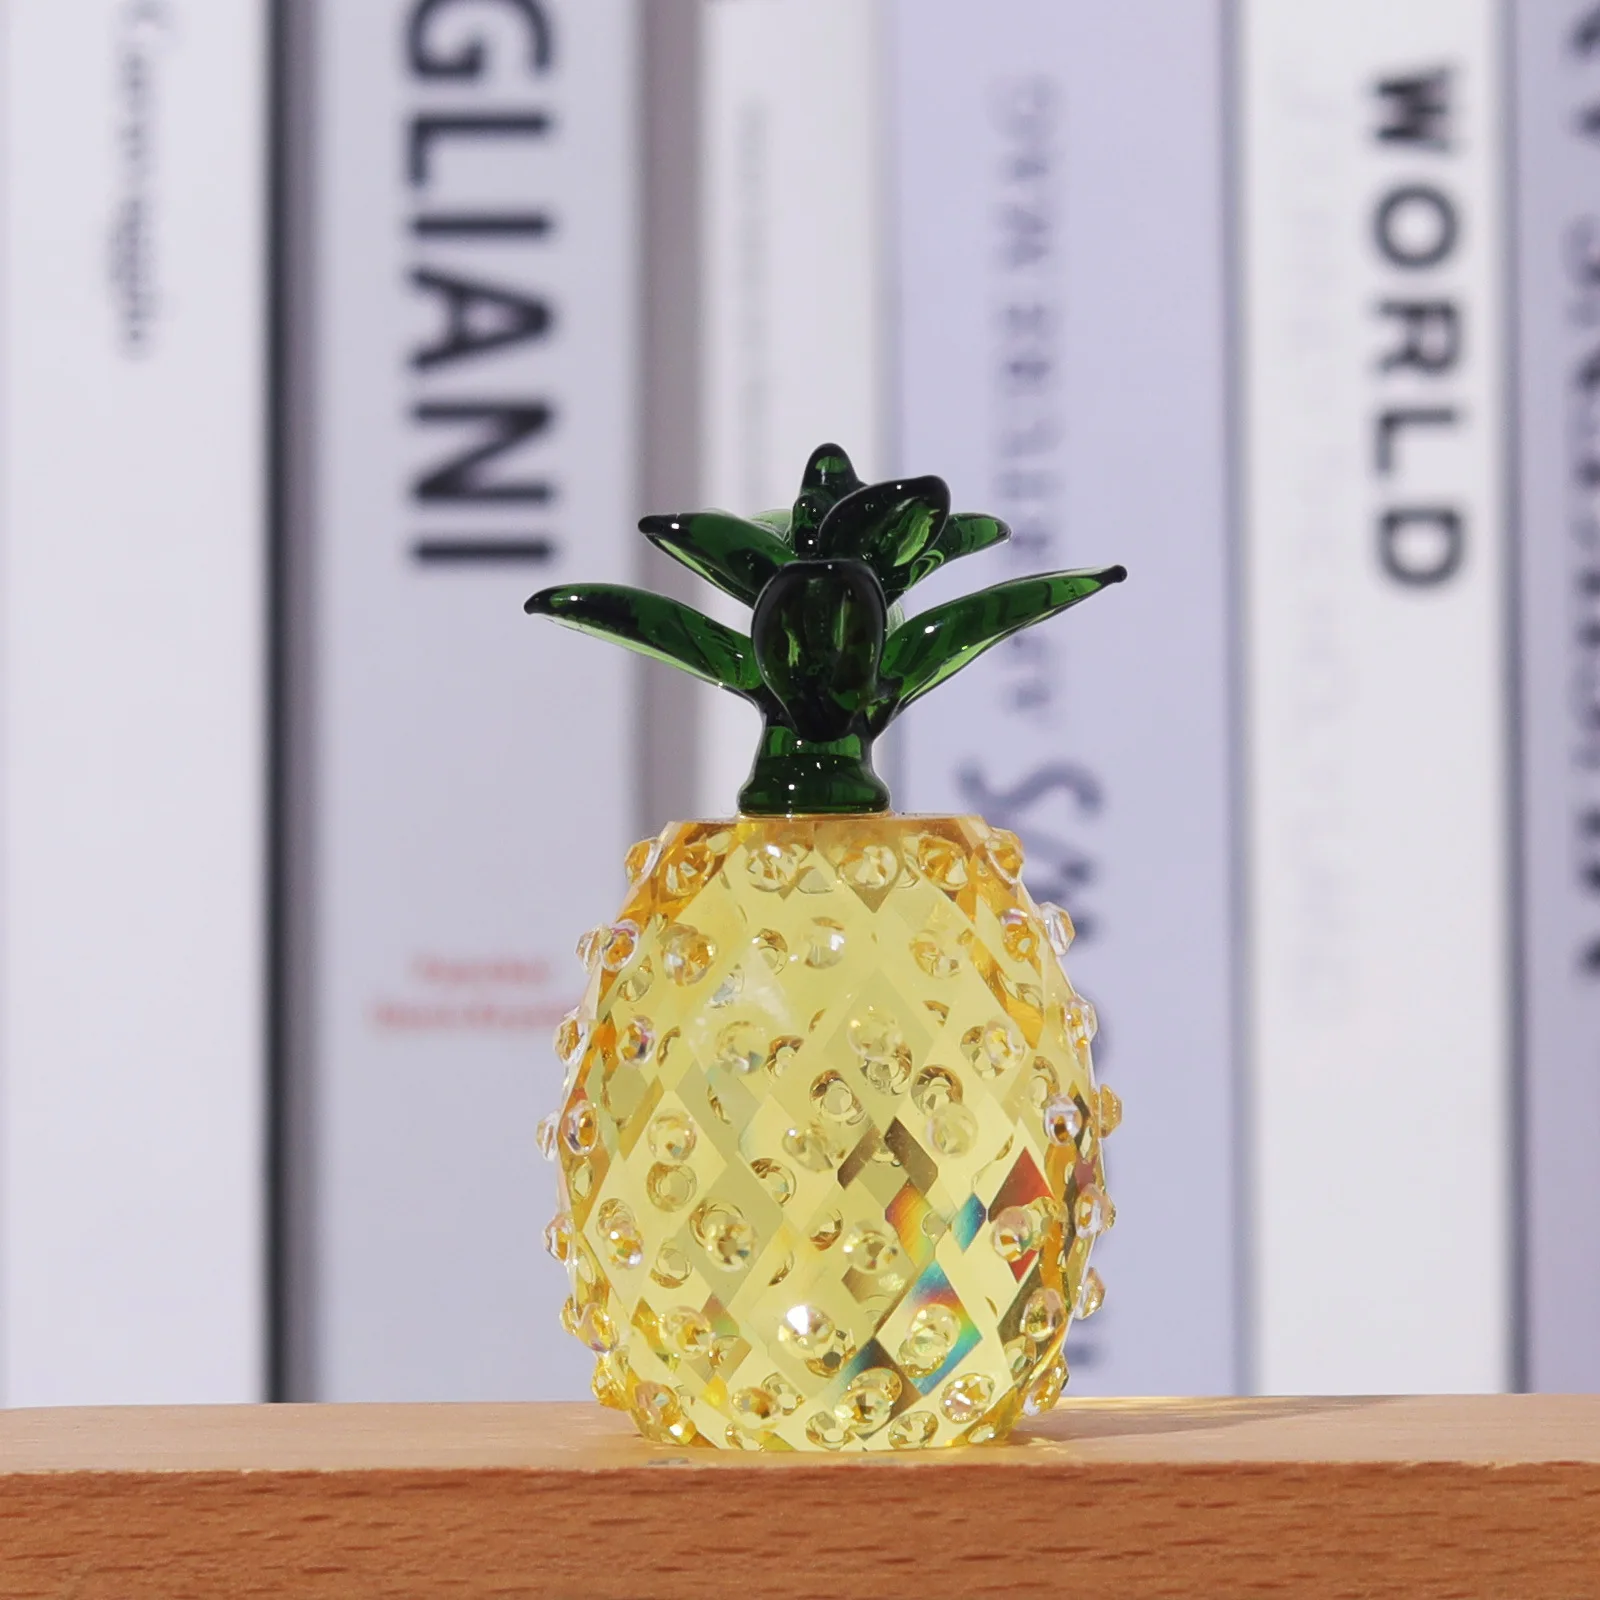 

Colors Crystal Pineapple Paperweight Glass Fruit Crafts Interior Mini Decoration Creative Birthday Gift Home Tabletop Ornament